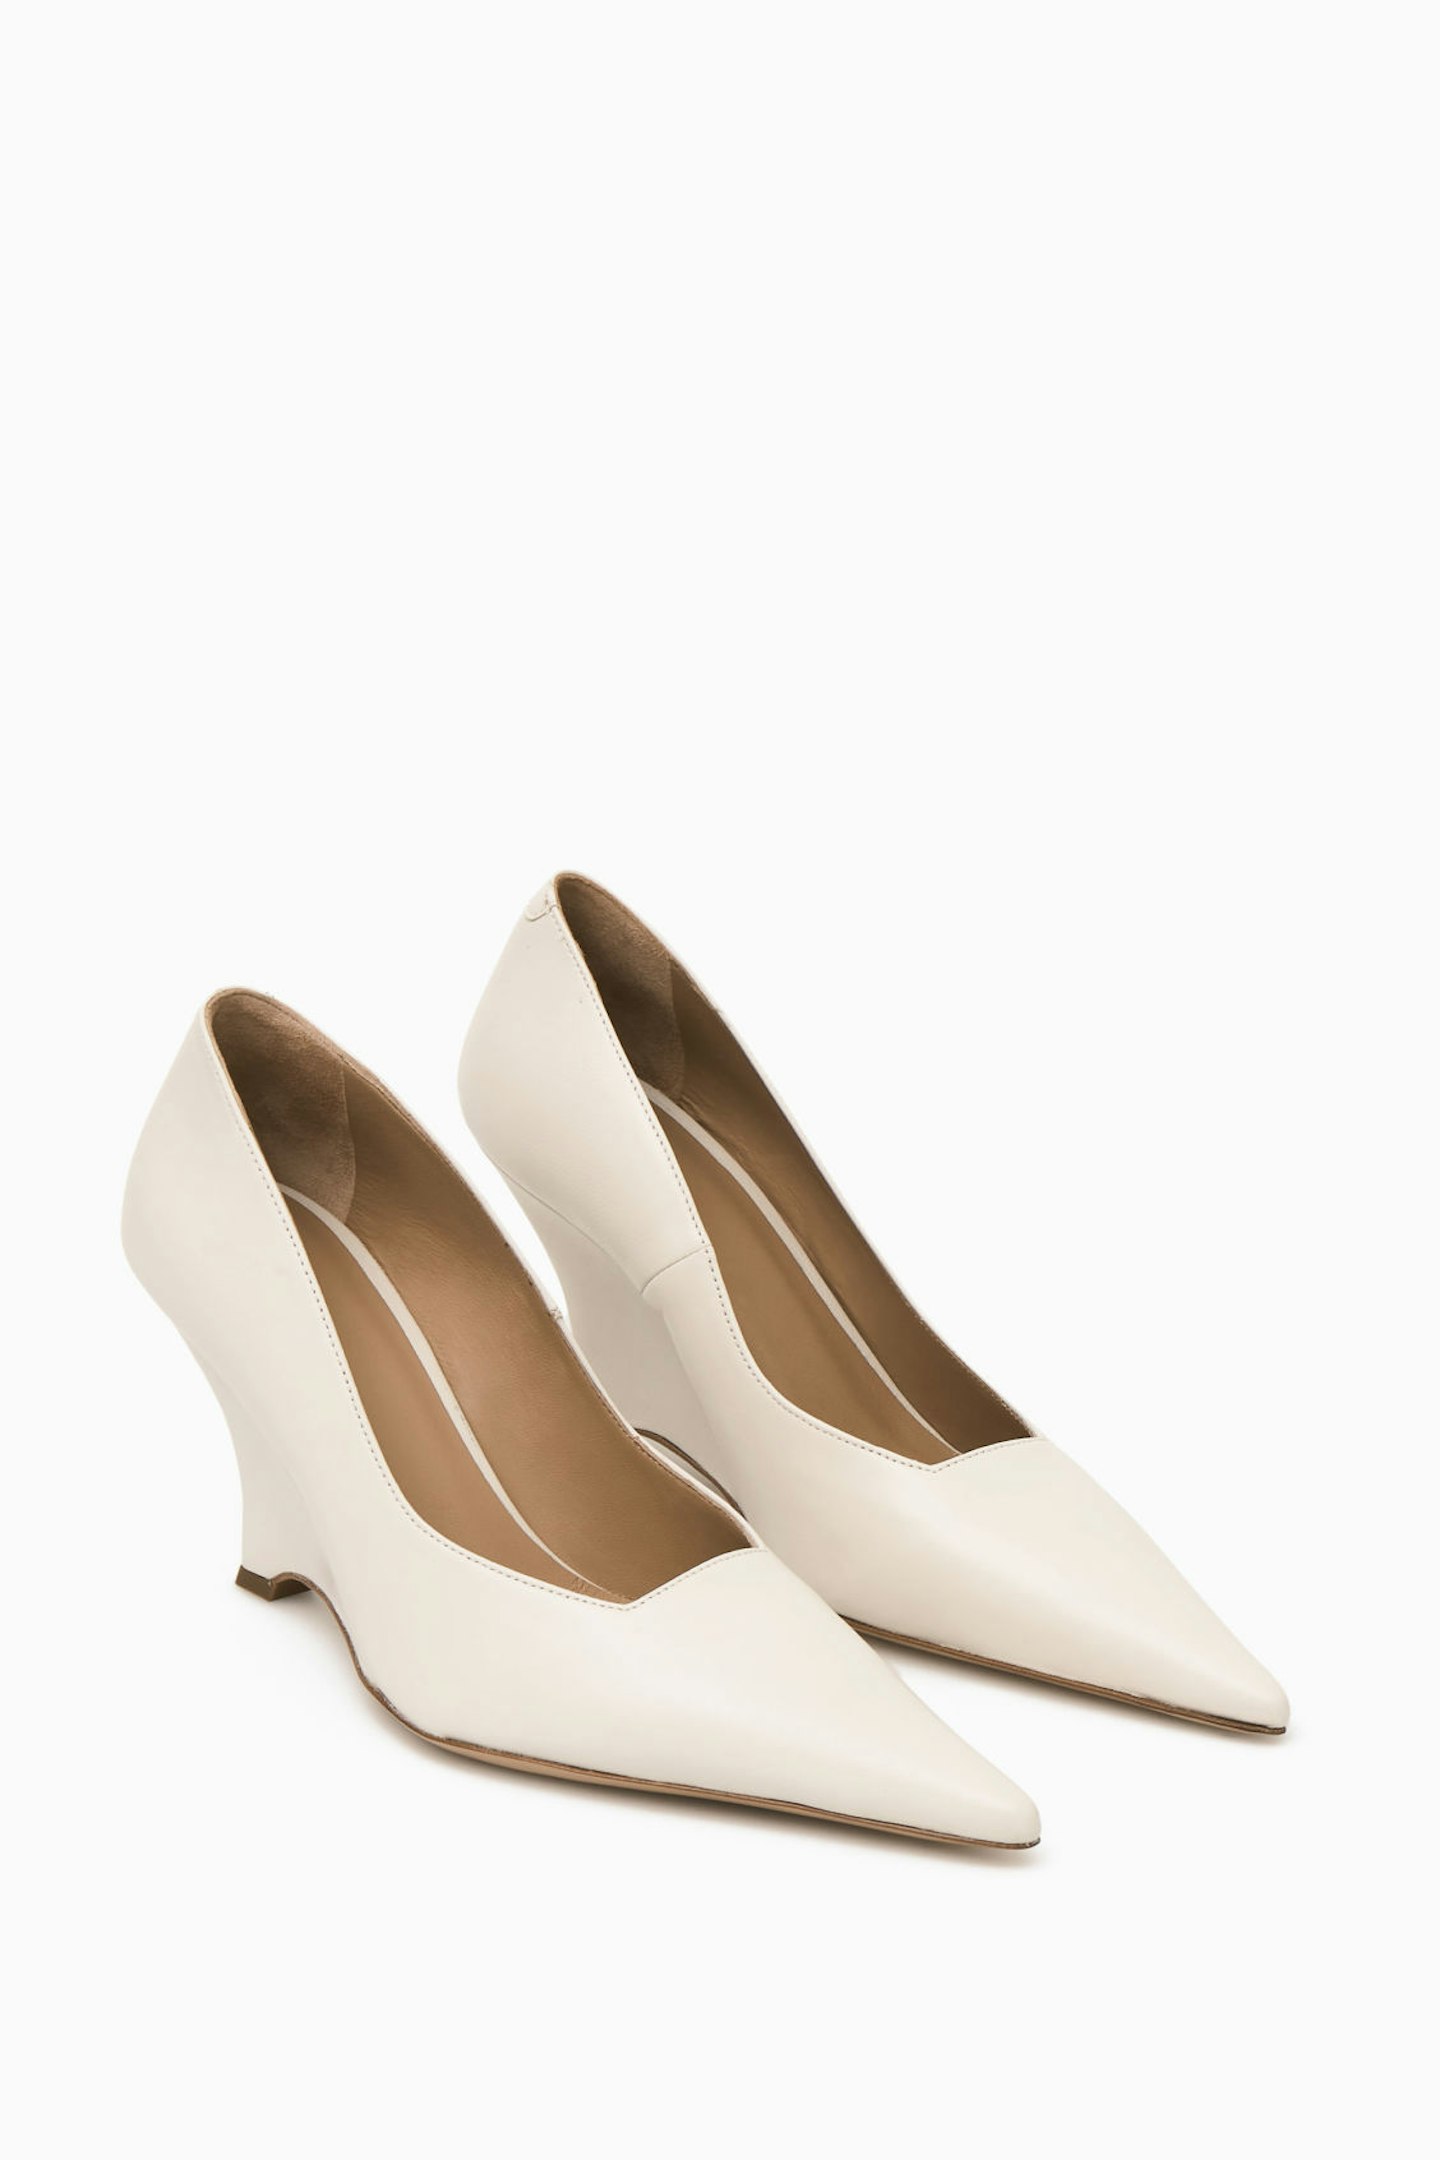 COS, Pointed Leather Wedge Pumps